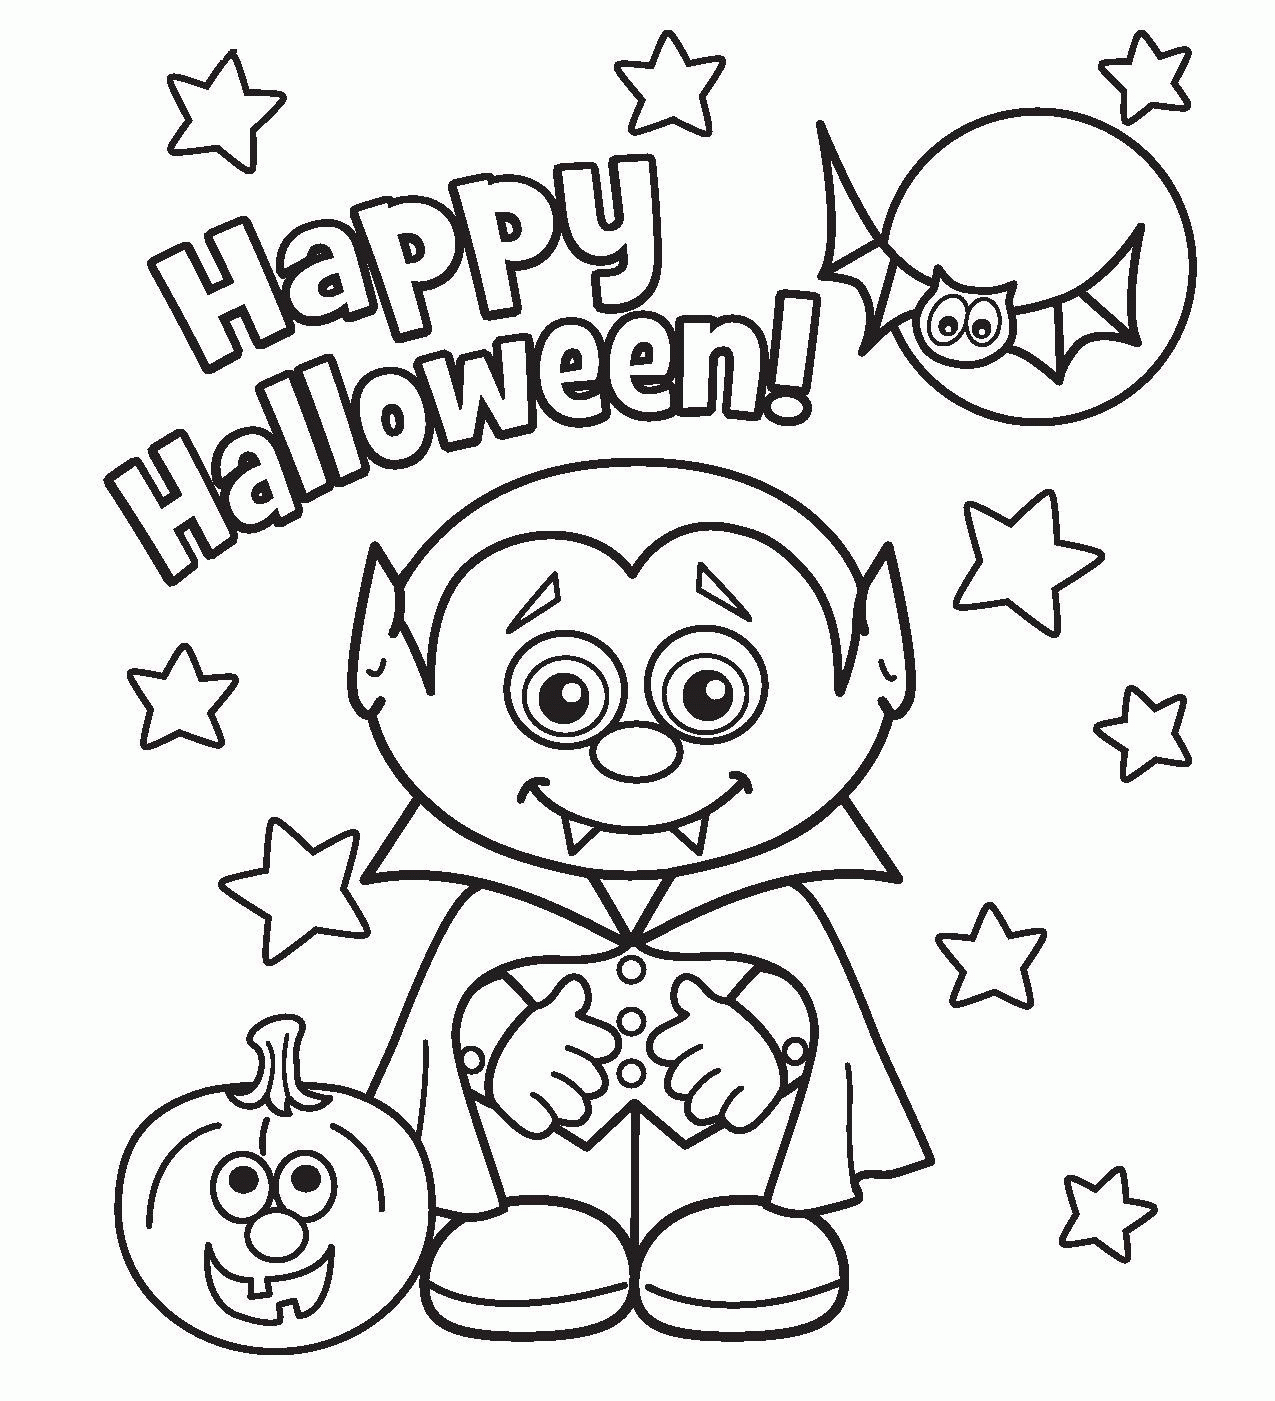 Download Halloween Coloring Pages For Older Kids - Coloring Home